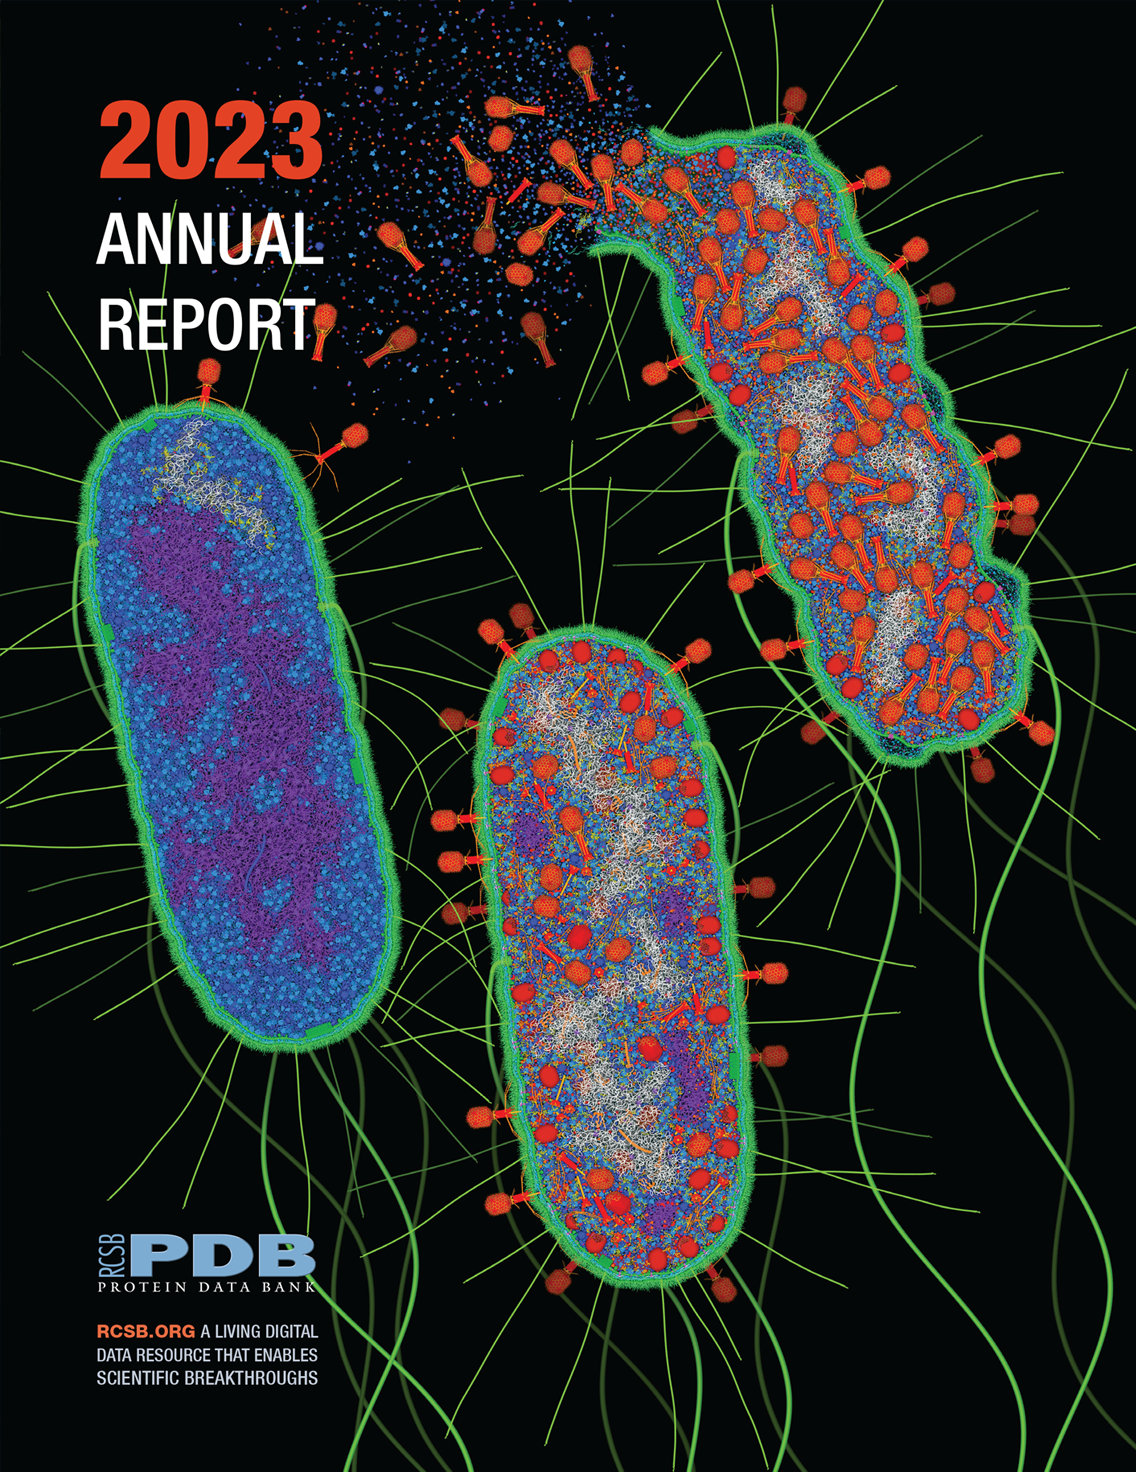 <a href="https://cdn.rcsb.org/rcsb-pdb/general_information/news_publications/annual_reports/annual_report_year_2023.pdf">Download the 2023 Annual Report PDF</a>